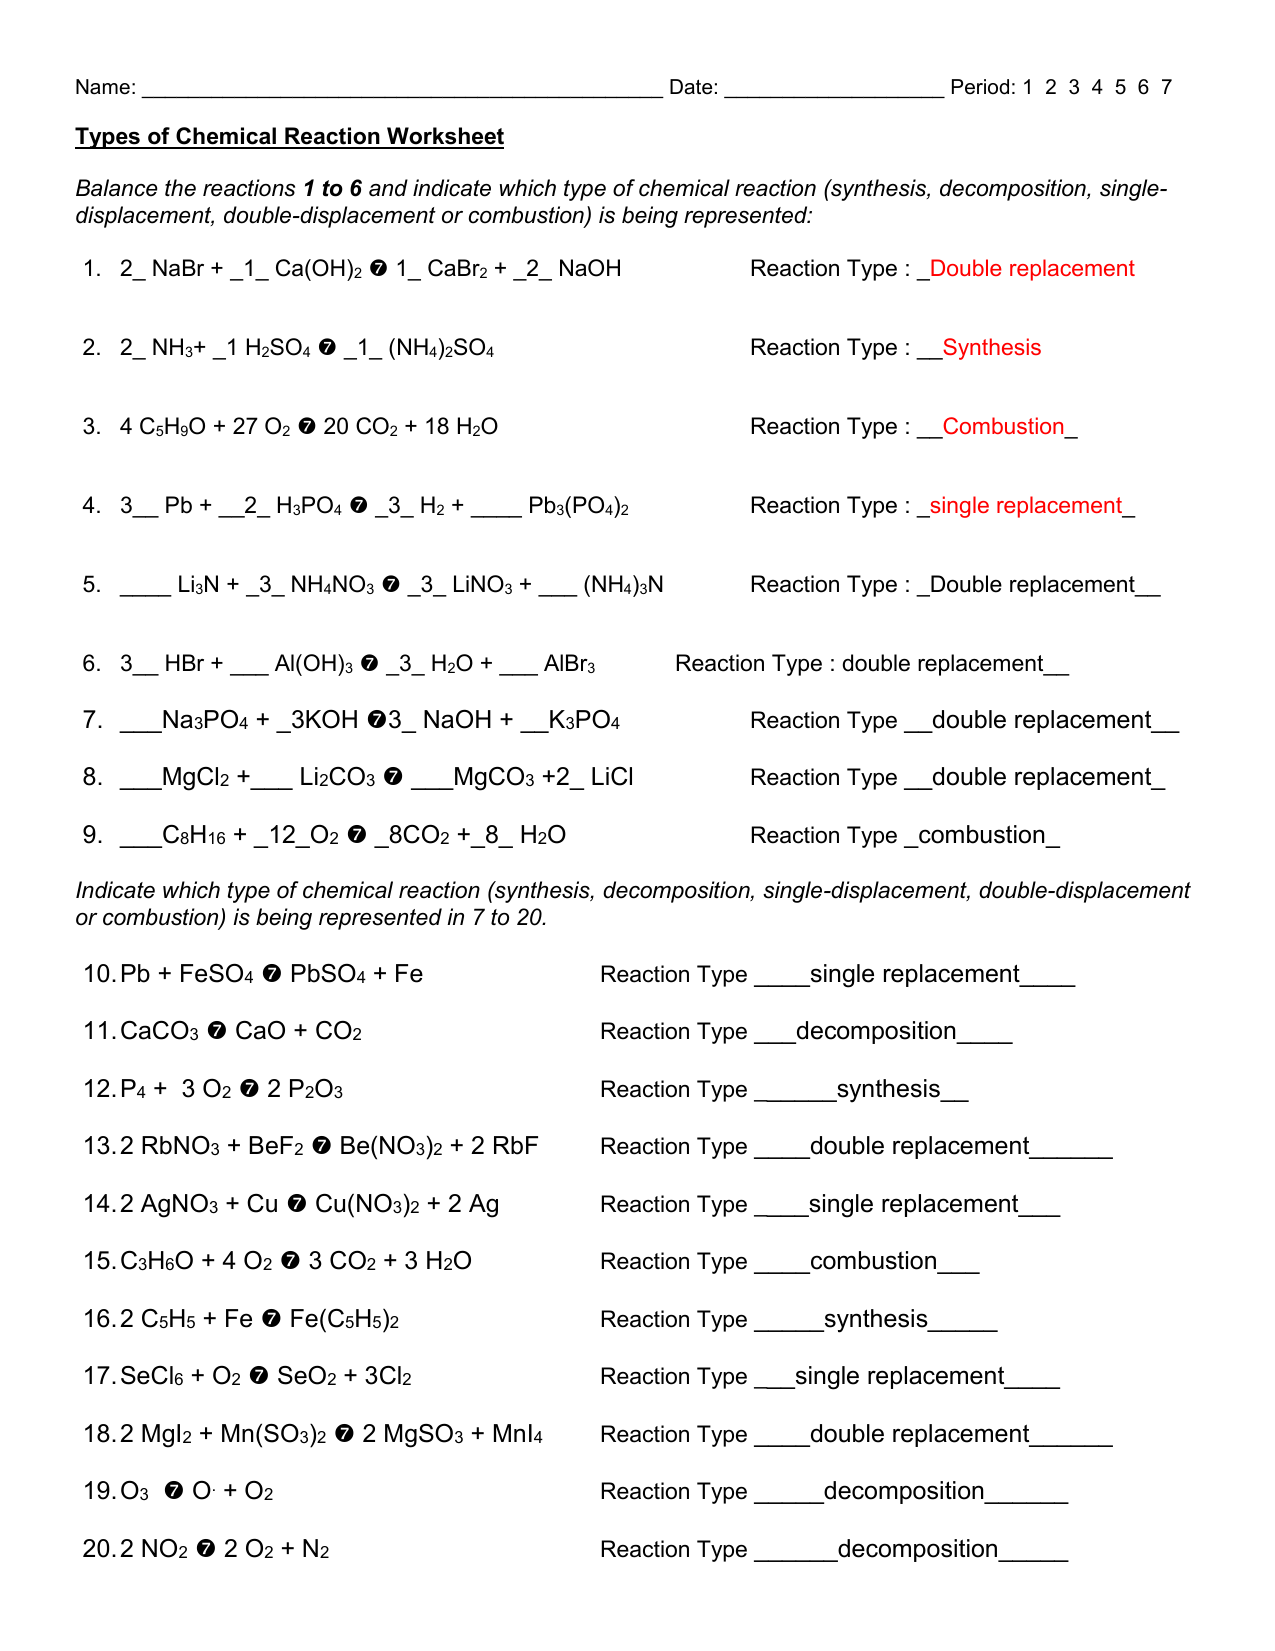 Types of Chemical Reaction Worksheetanswers Inside Chemical Reactions Worksheet Answers